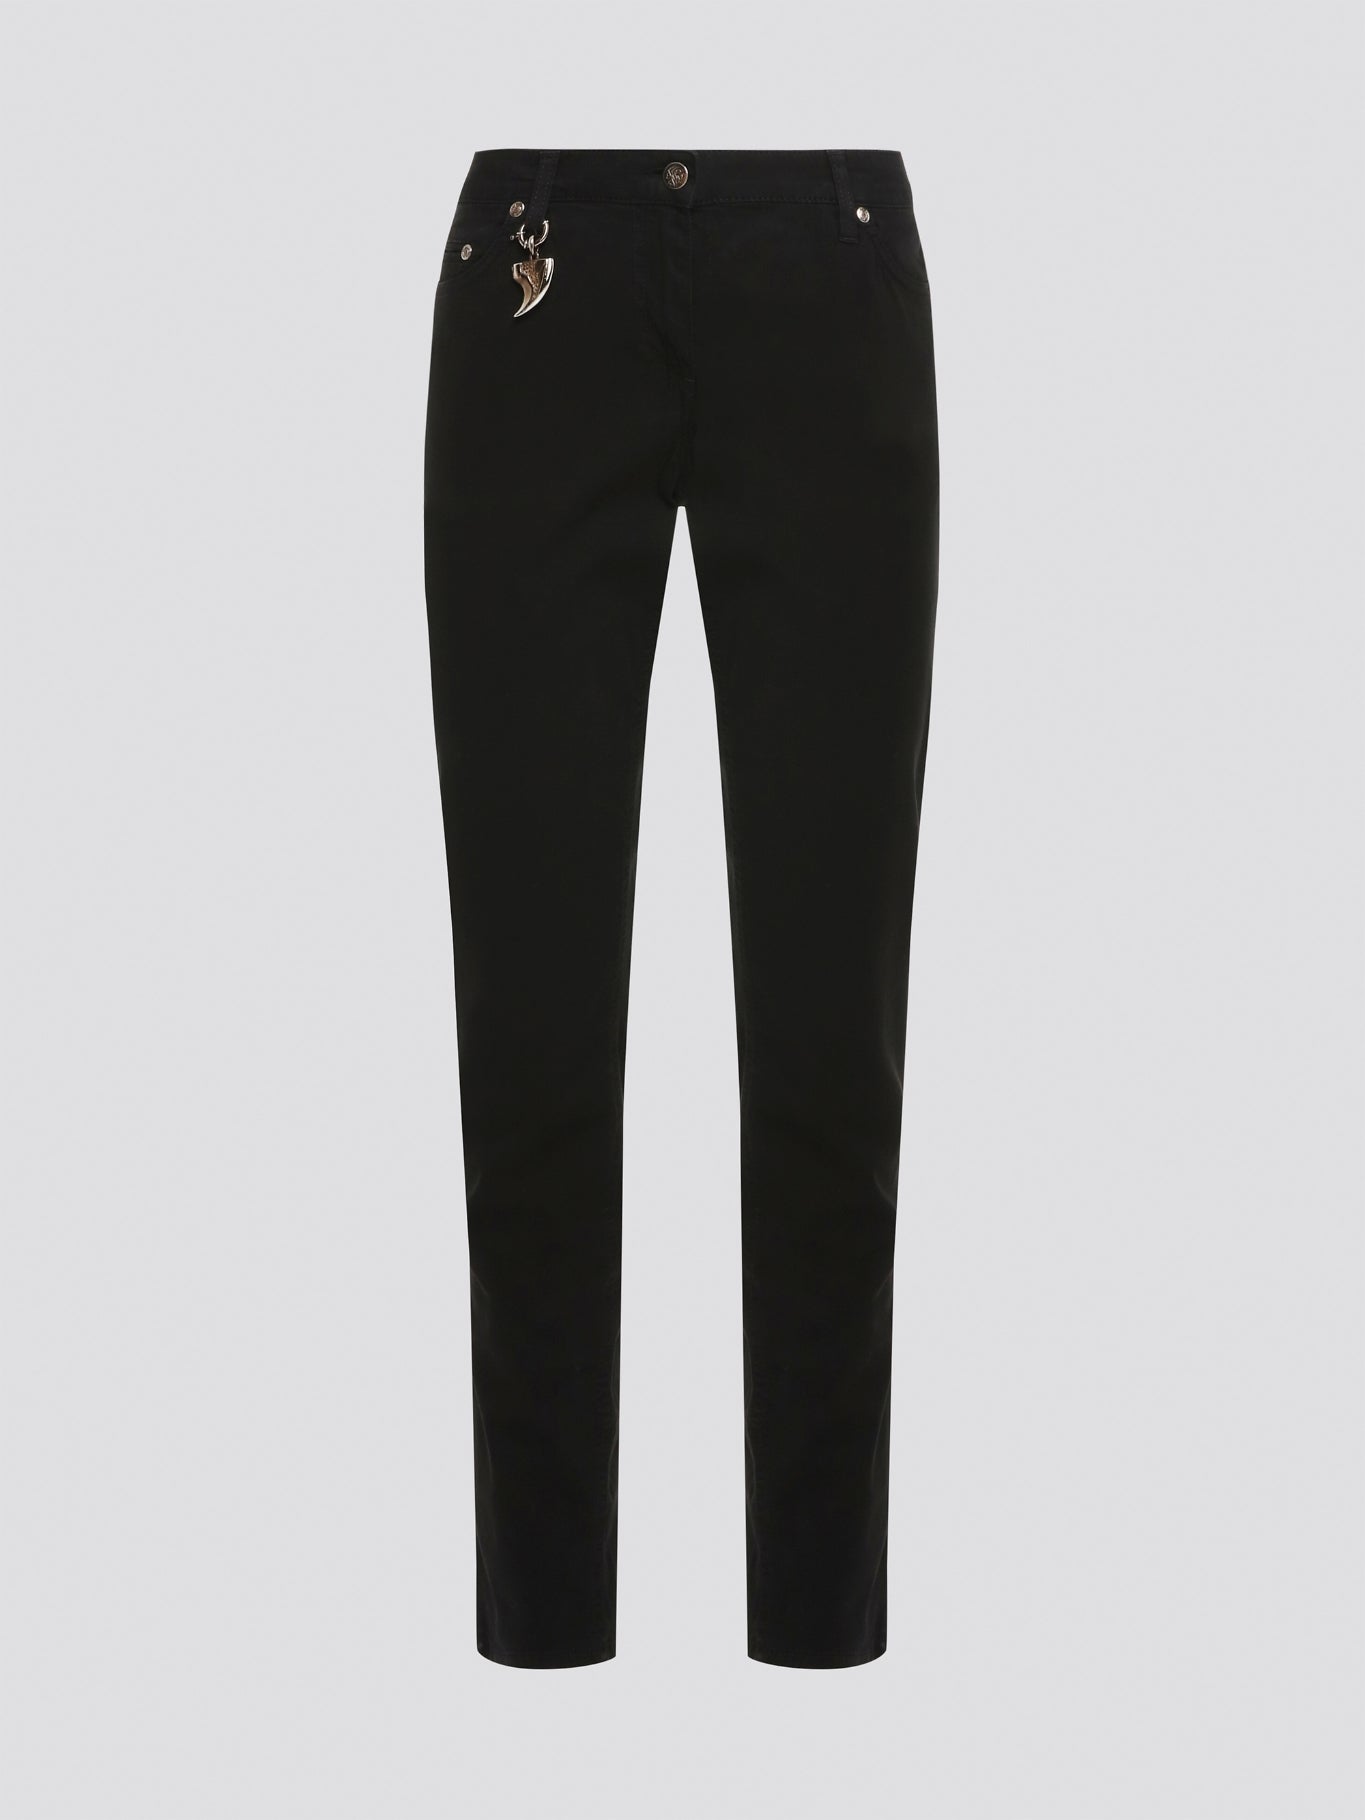 Step out in style with these sleek and versatile Black Skinny Fit Jeans from Roberto Cavalli. Made from premium quality denim, these jeans hug your curves in all the right places while offering unbeatable comfort. Whether dressed up with heels or down with sneakers, these jeans are a must-have for any fashion-forward wardrobe.